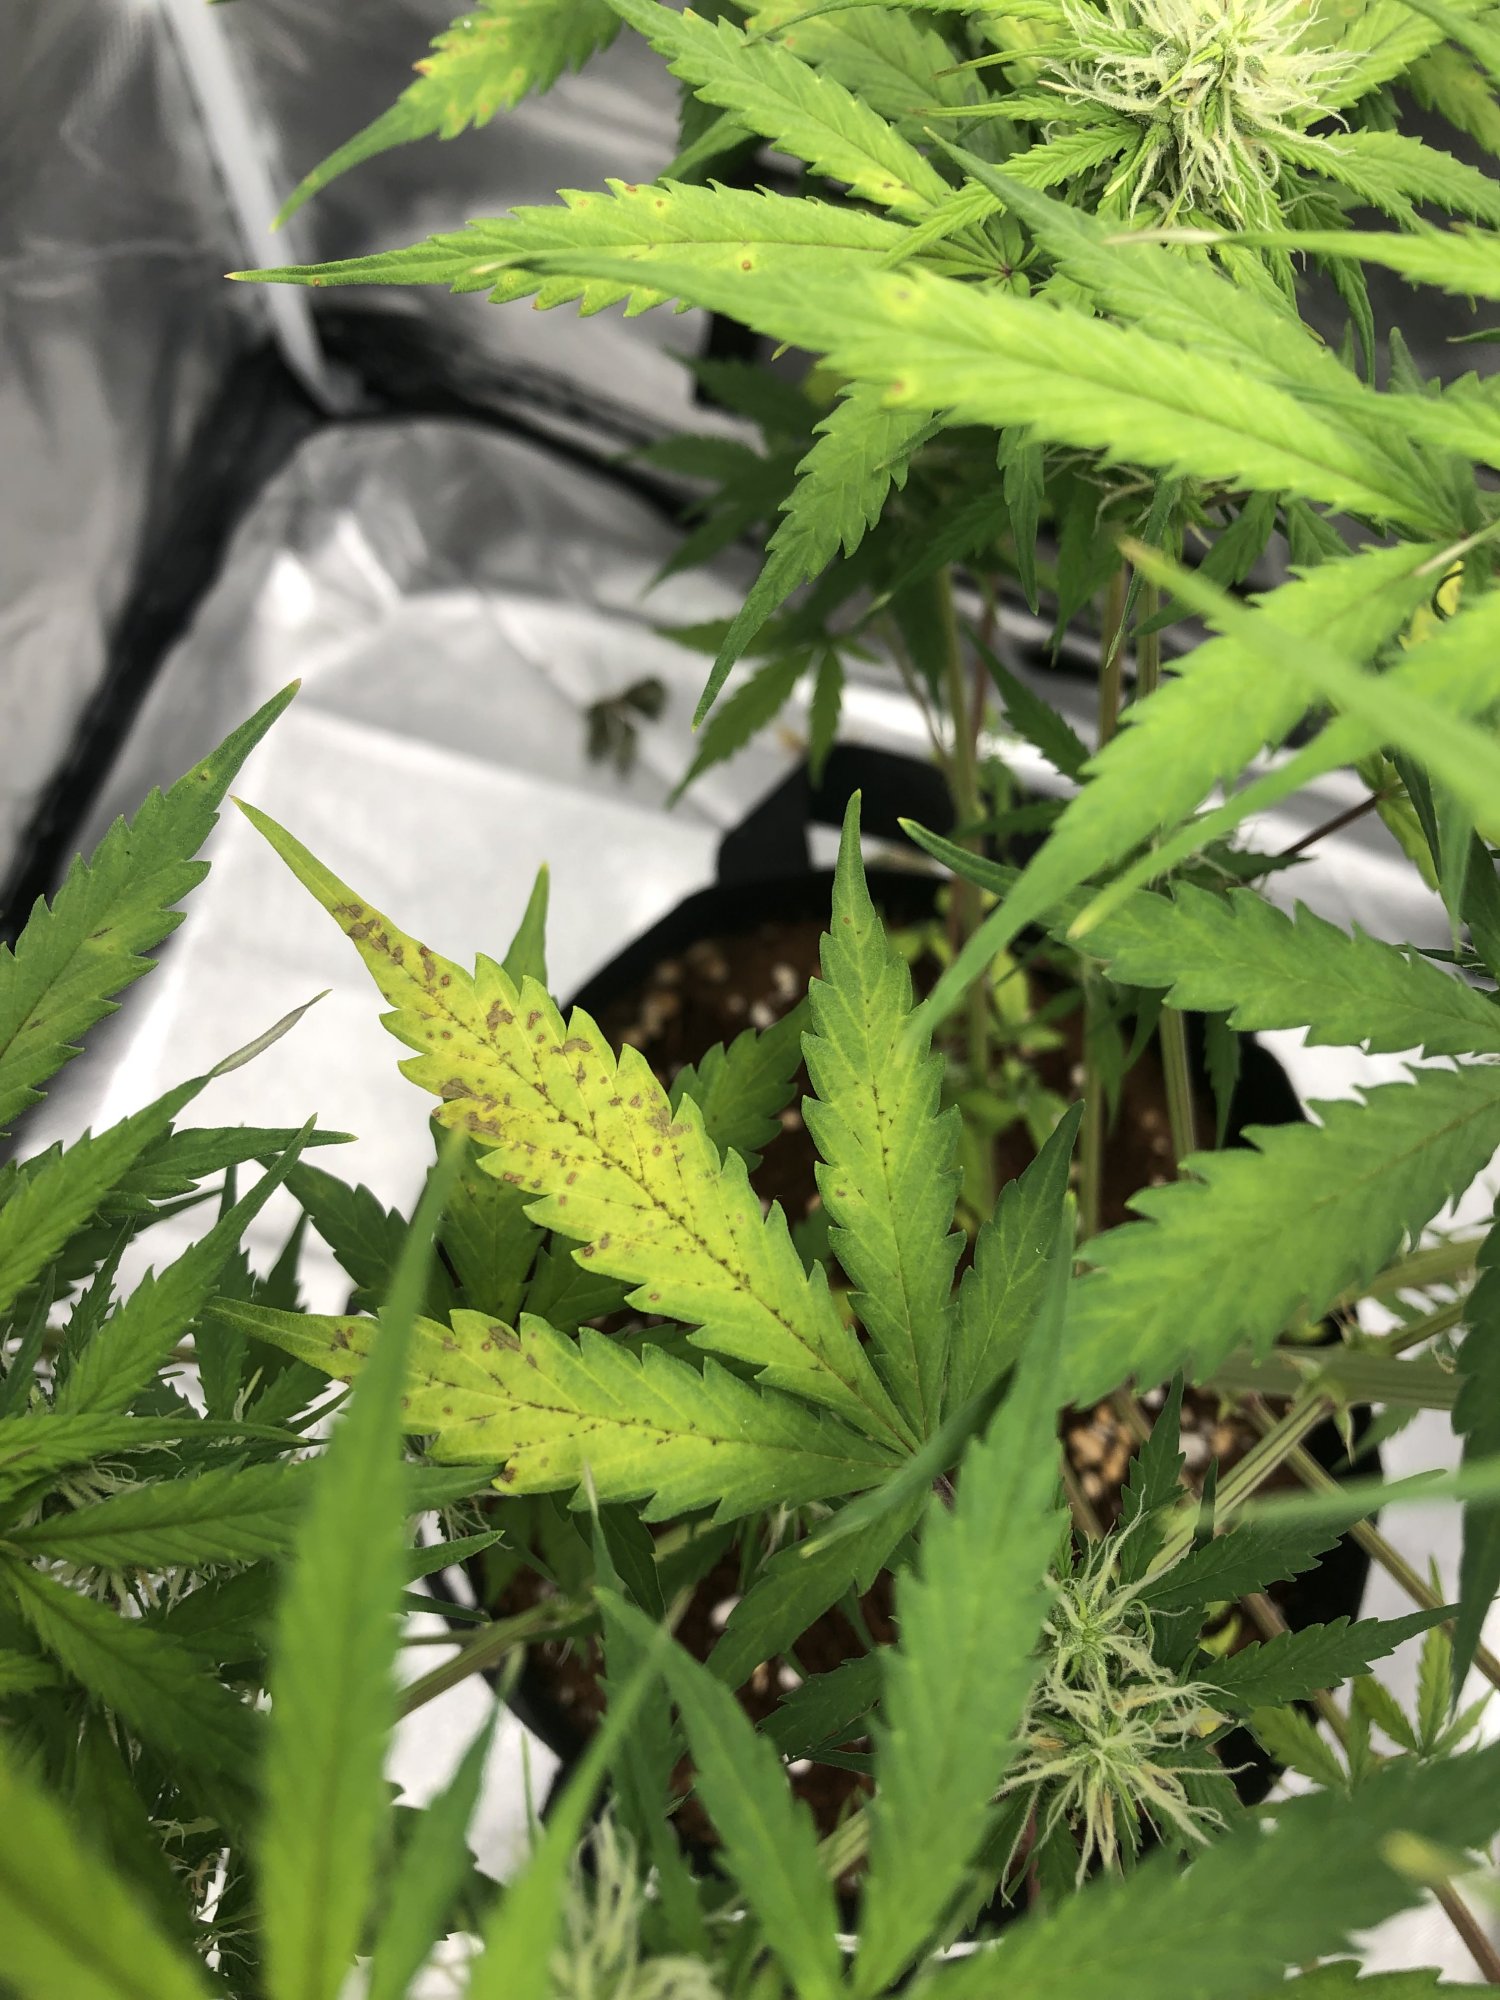 Help leaves turning yellow with spots 4